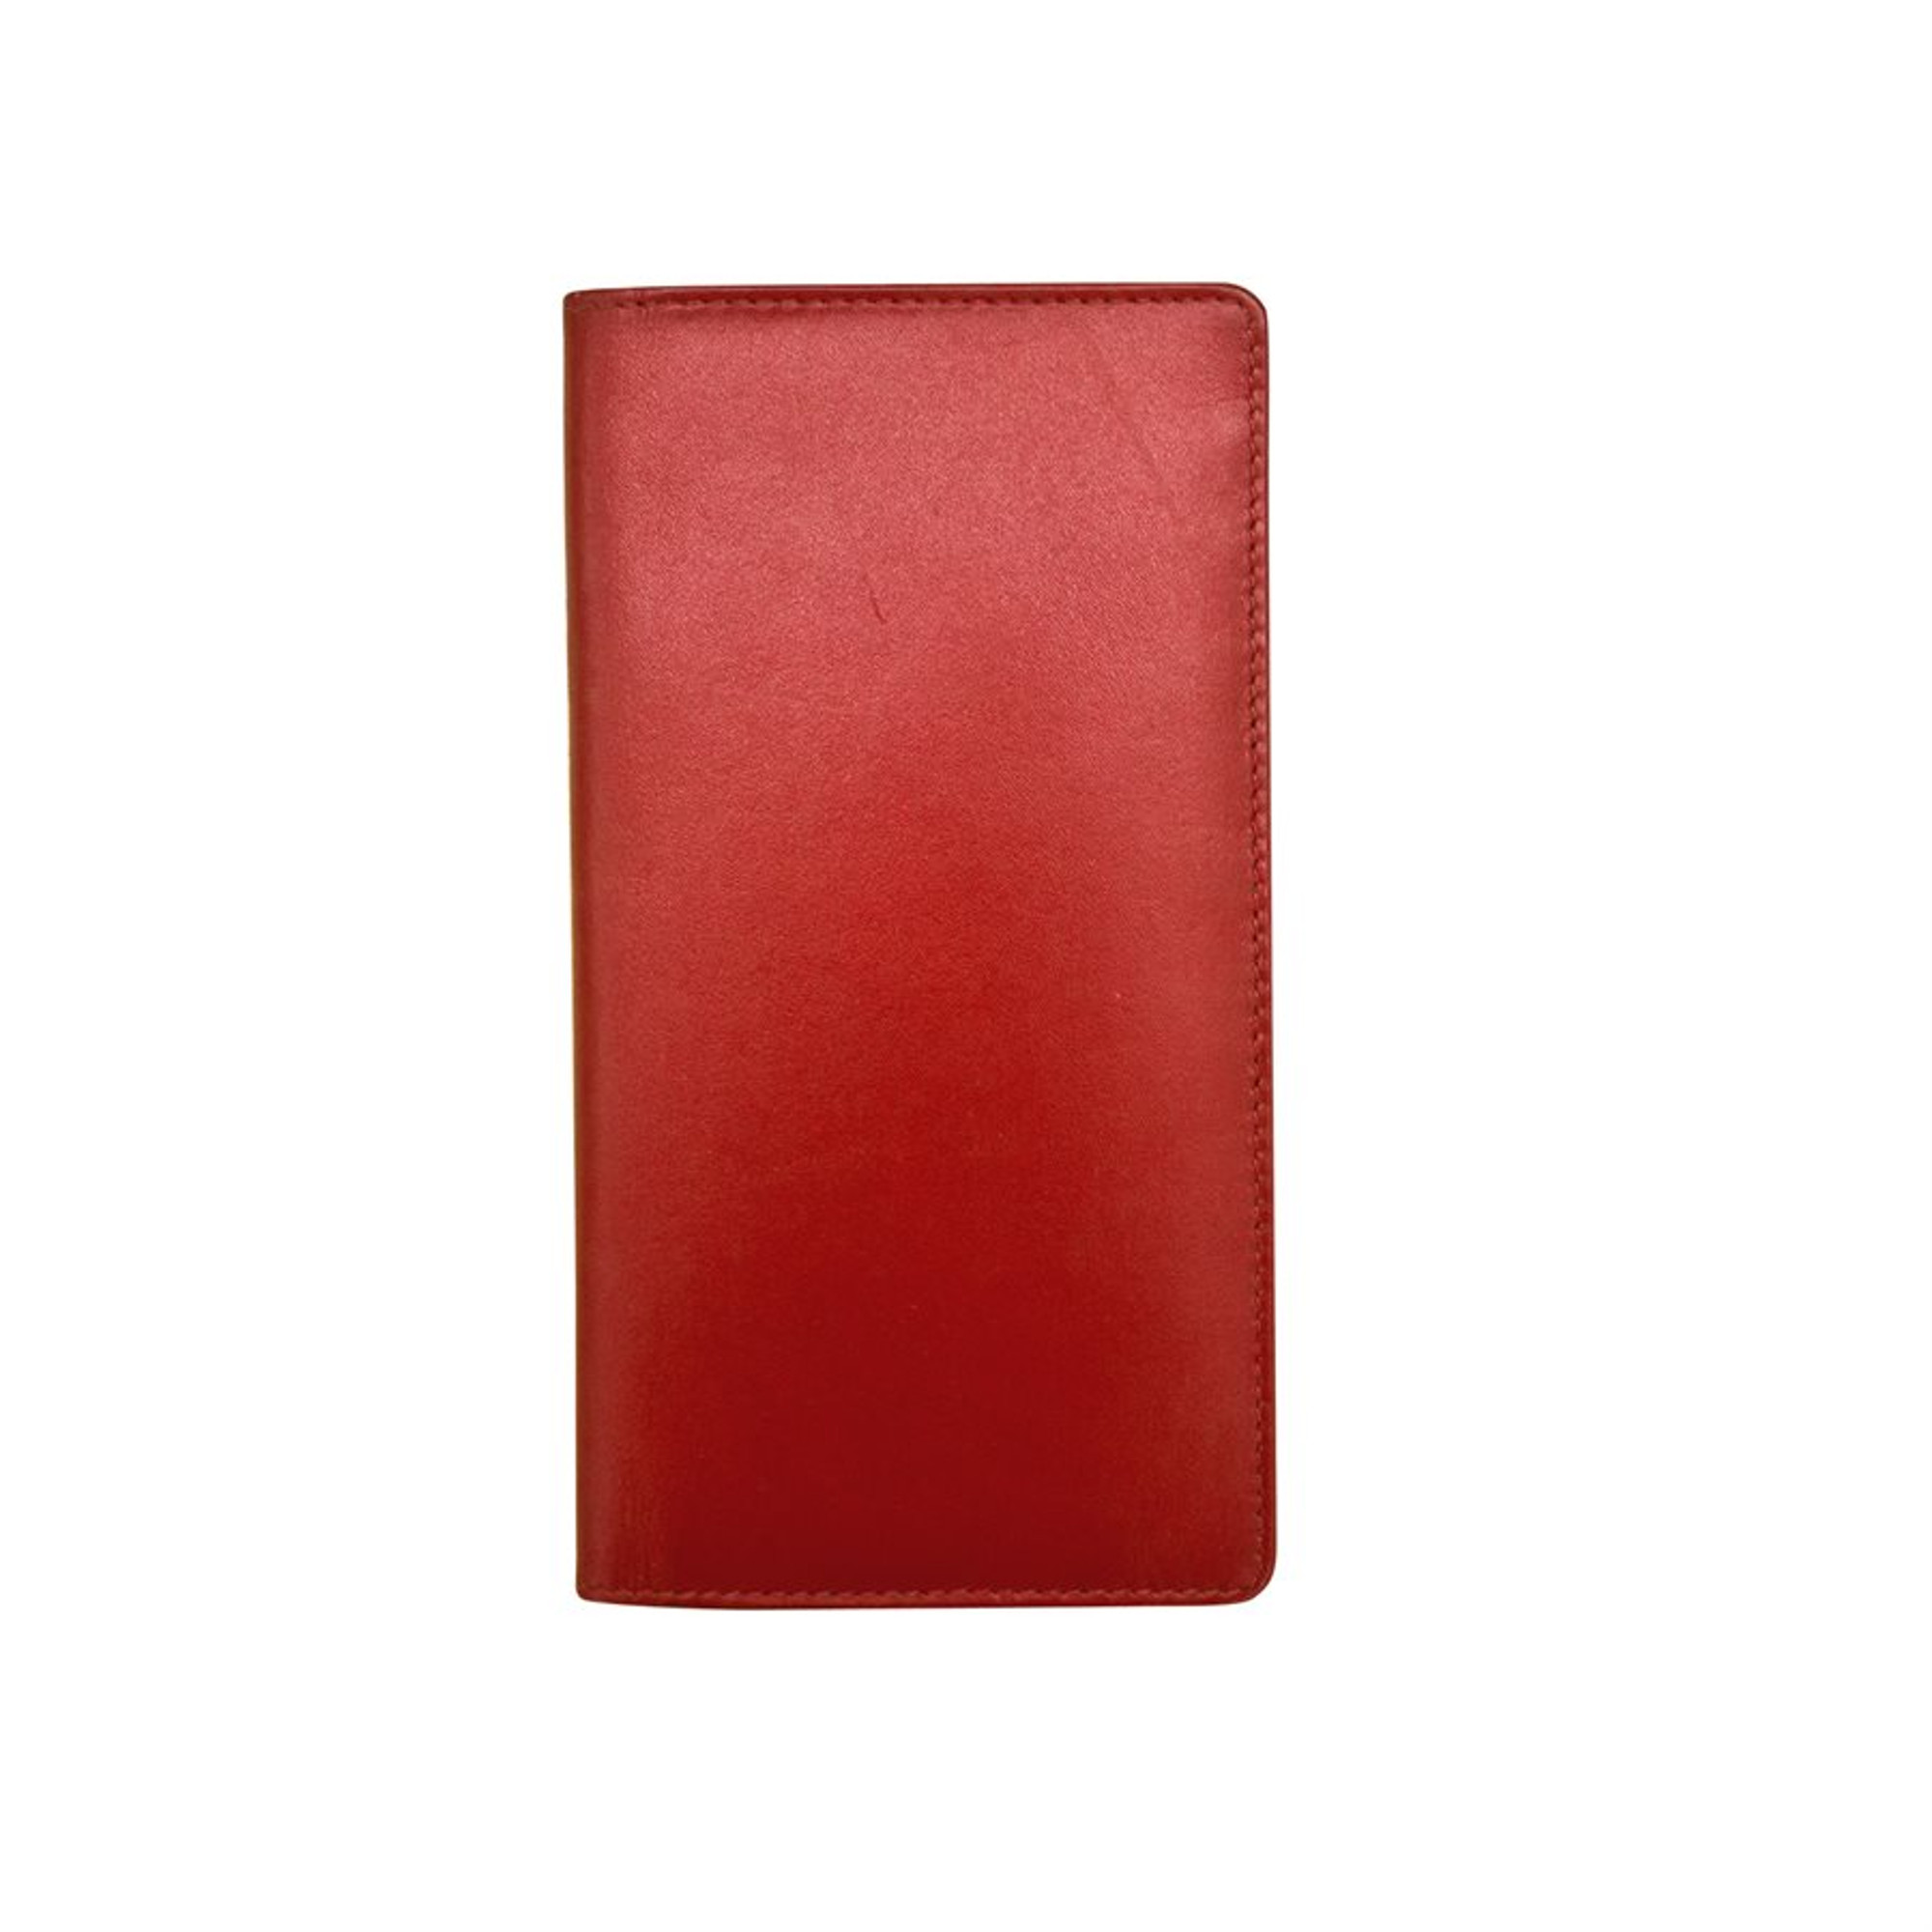 Beausoleil - Leather Personal Checkbook Cover